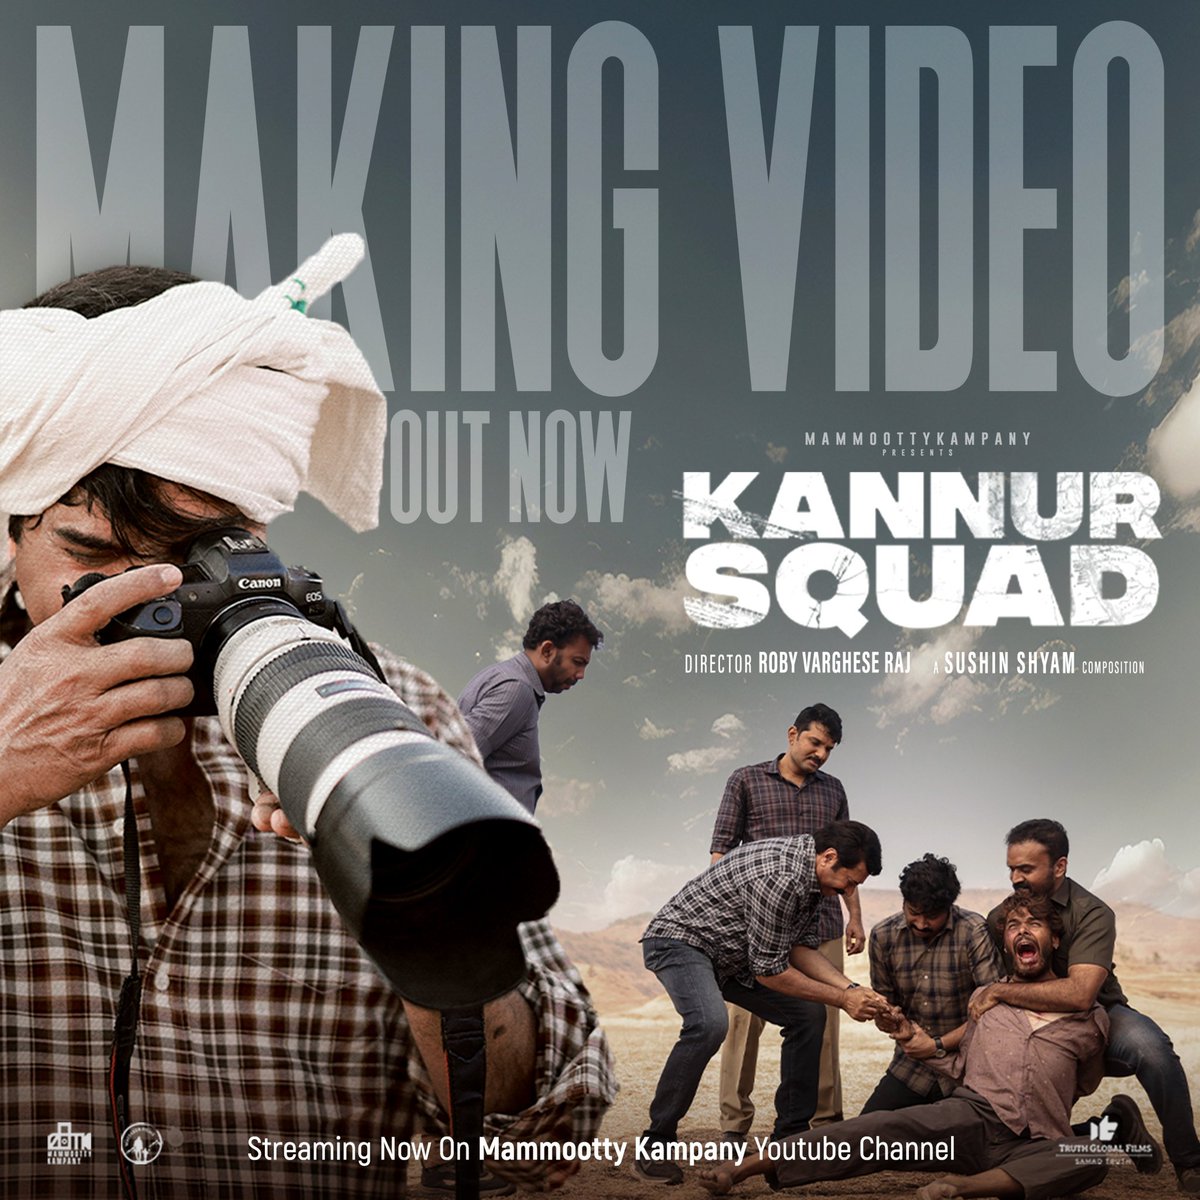 #KannurSquad Making Video Vol - 3 Out Now On Official Youtube Channel of @MKampanyOffl 😊 Youtube Link : youtu.be/FDb9aC8VDsE @mammukka #Mammootty #MammoottyKampany